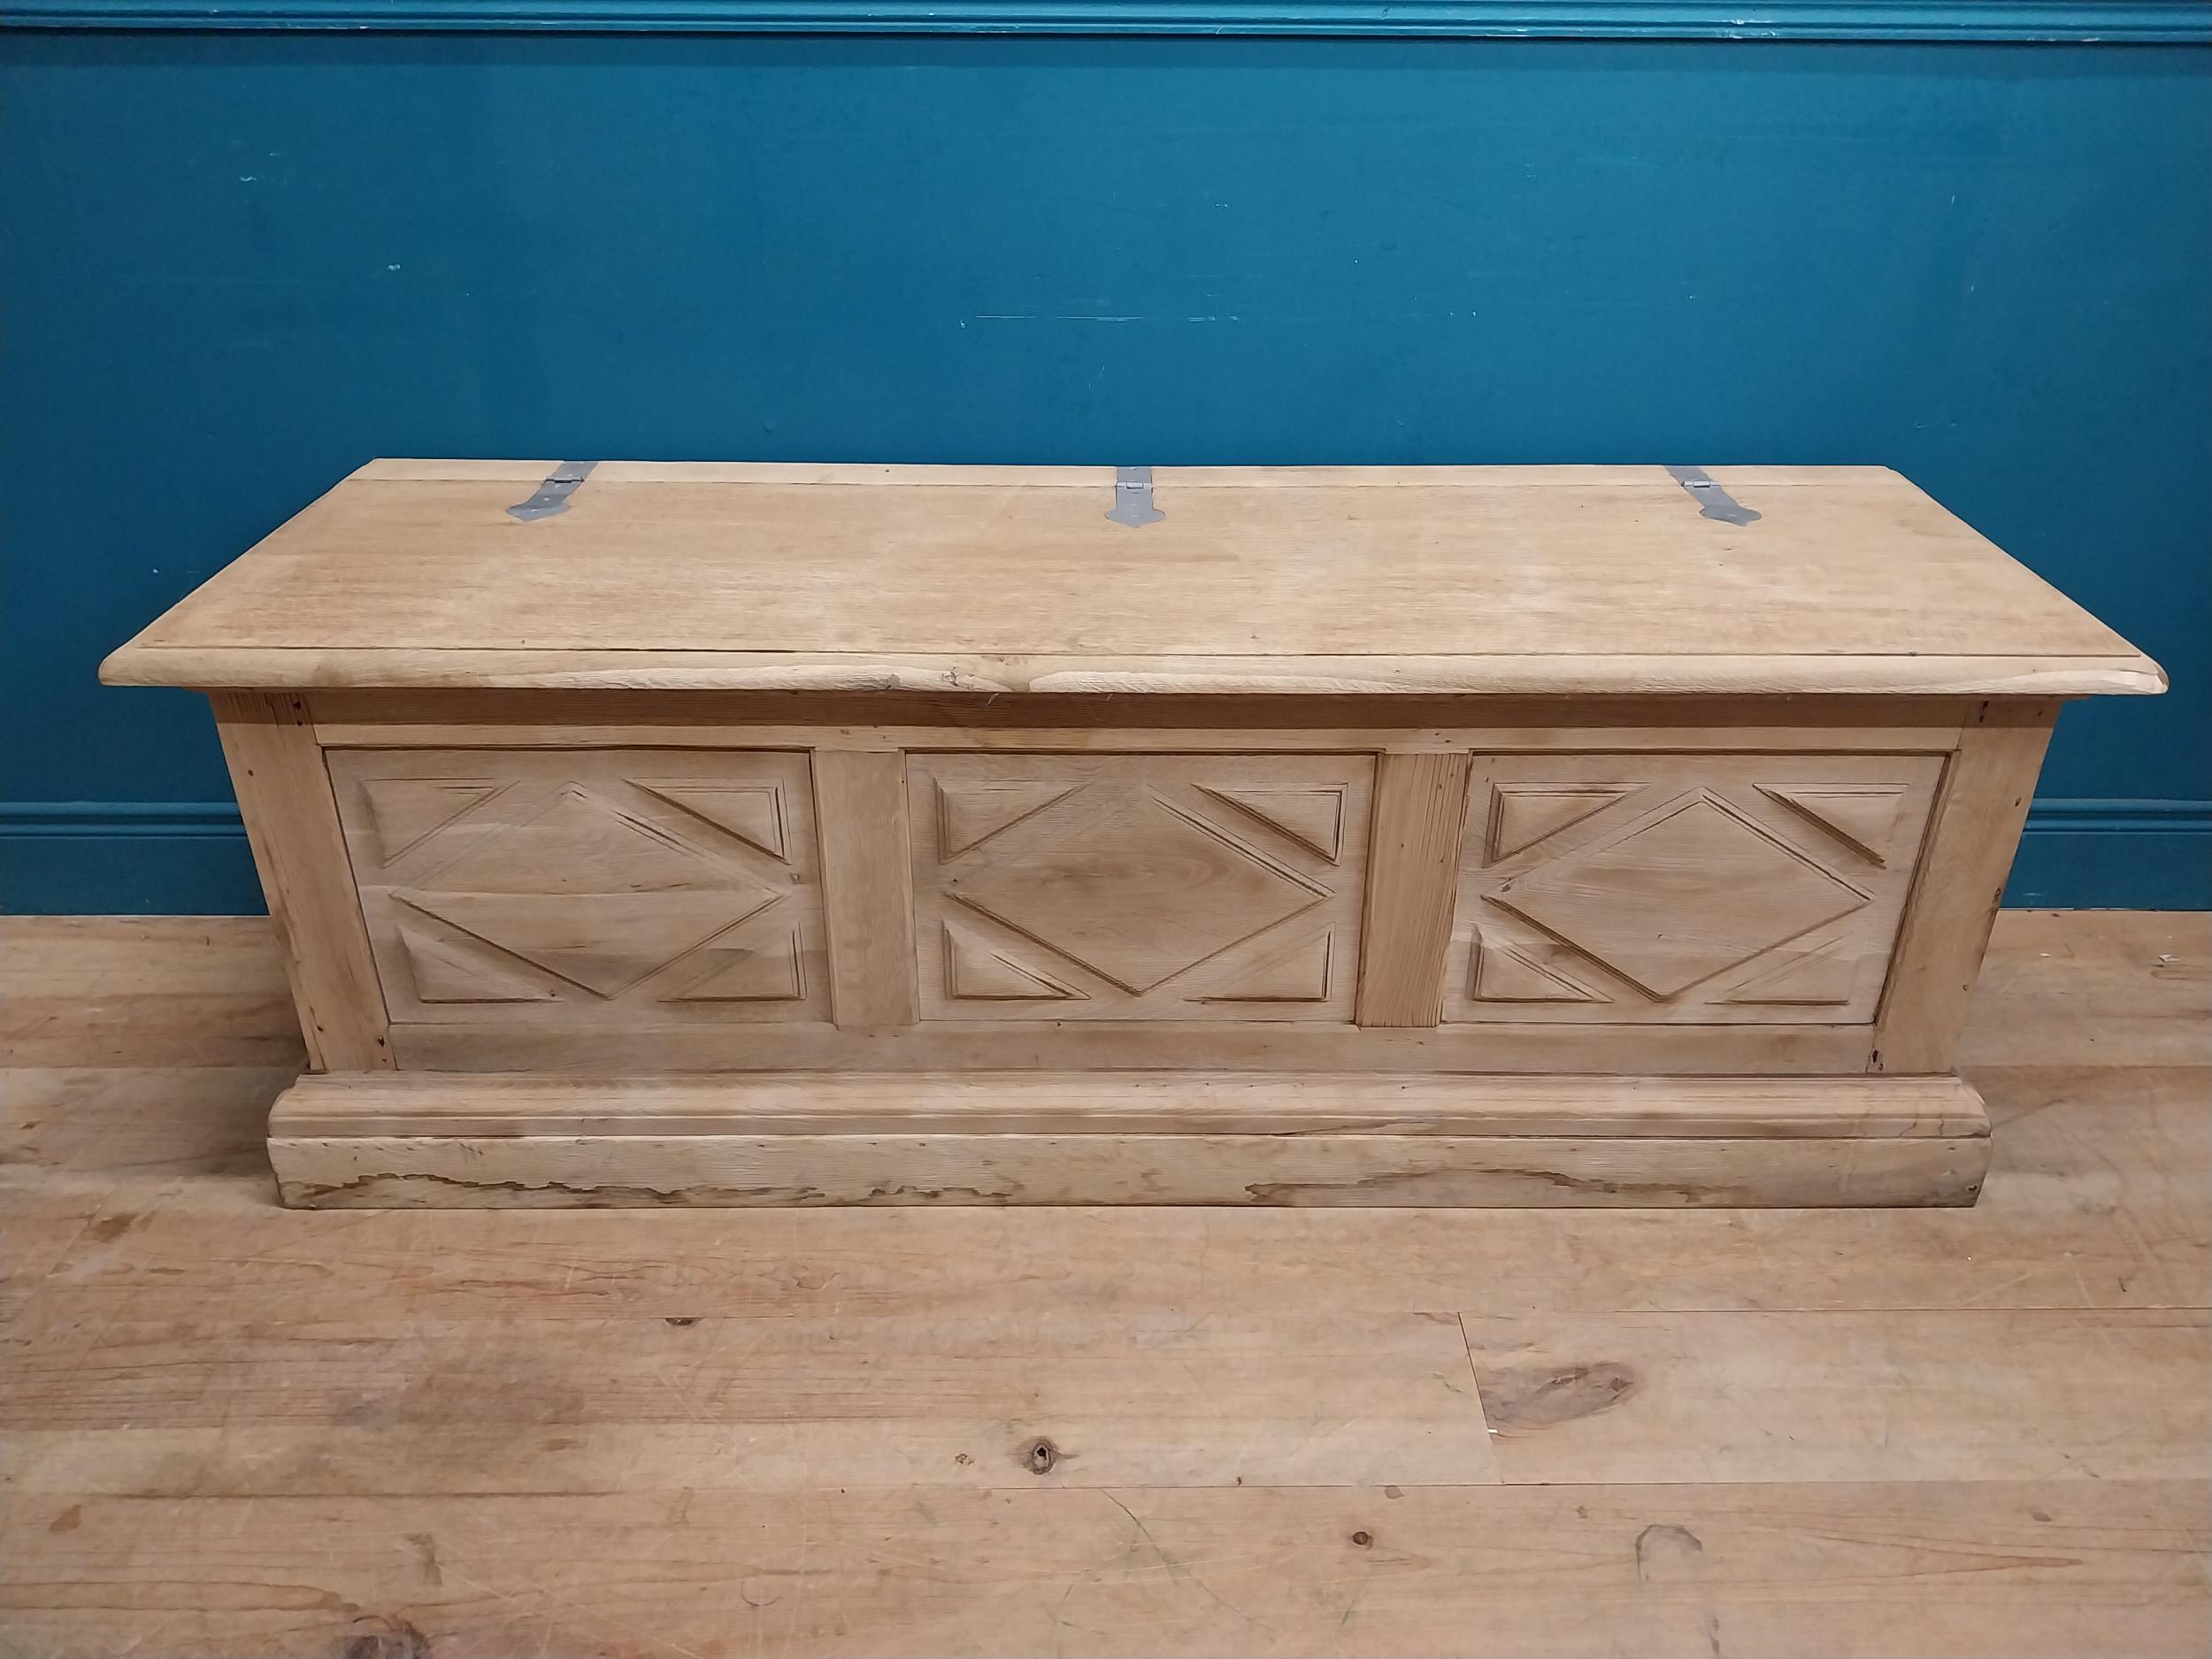 Early 20th C. bleached oak blanket box with metal mounts. {57 cm H x 162 cm W x 52 cm D}. - Image 2 of 6